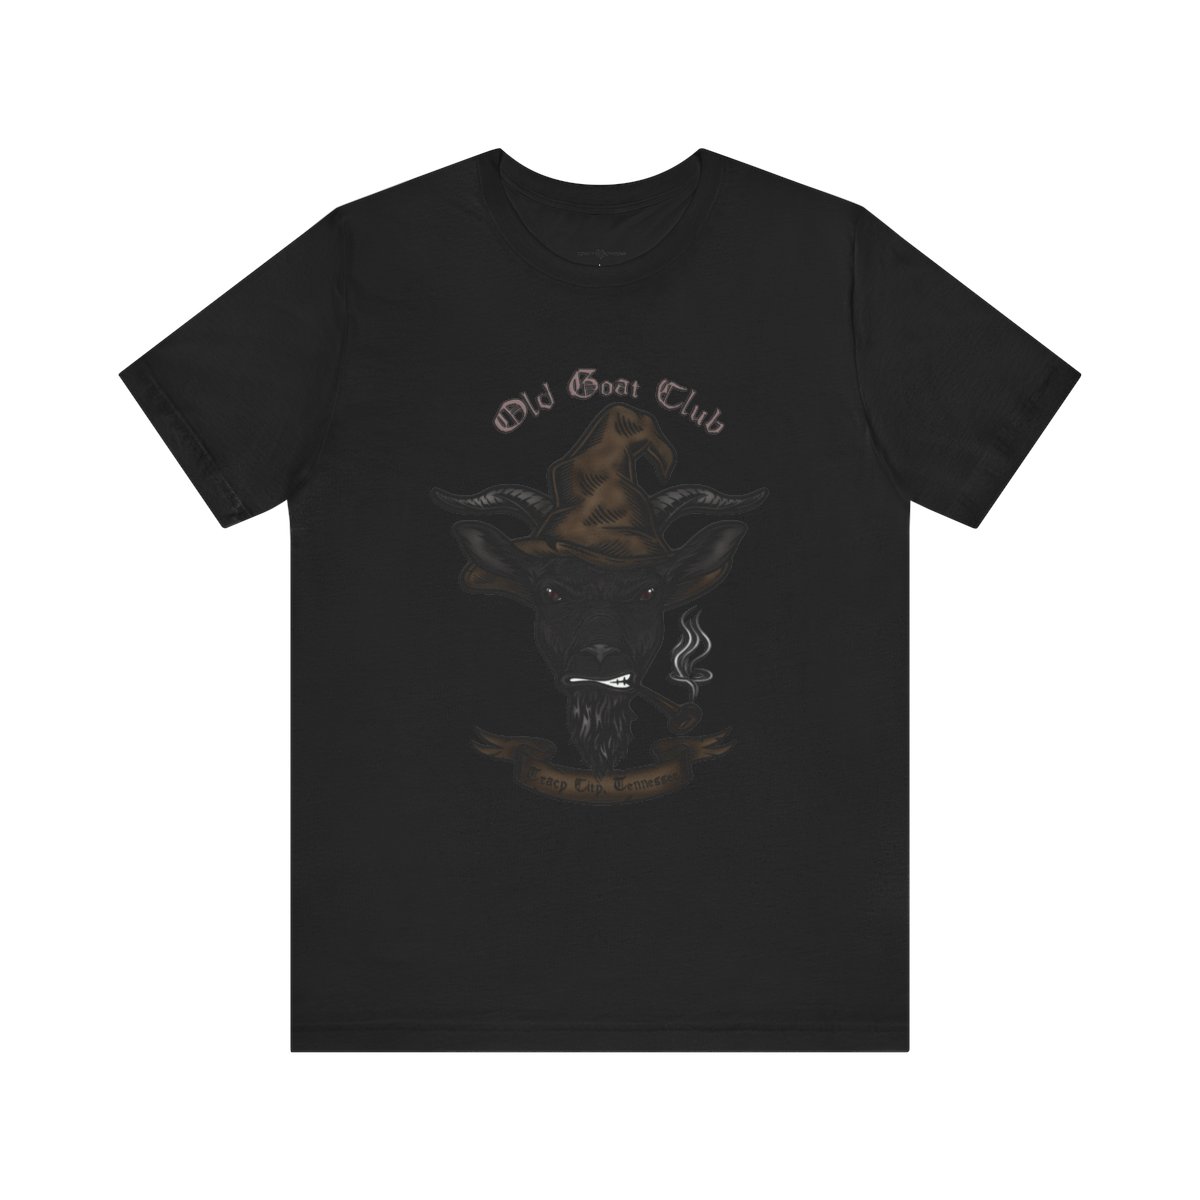 "Old Goat Club-Tracy City, Tennessee" Unisex Jersey Short Sleeve Tee product thumbnail image